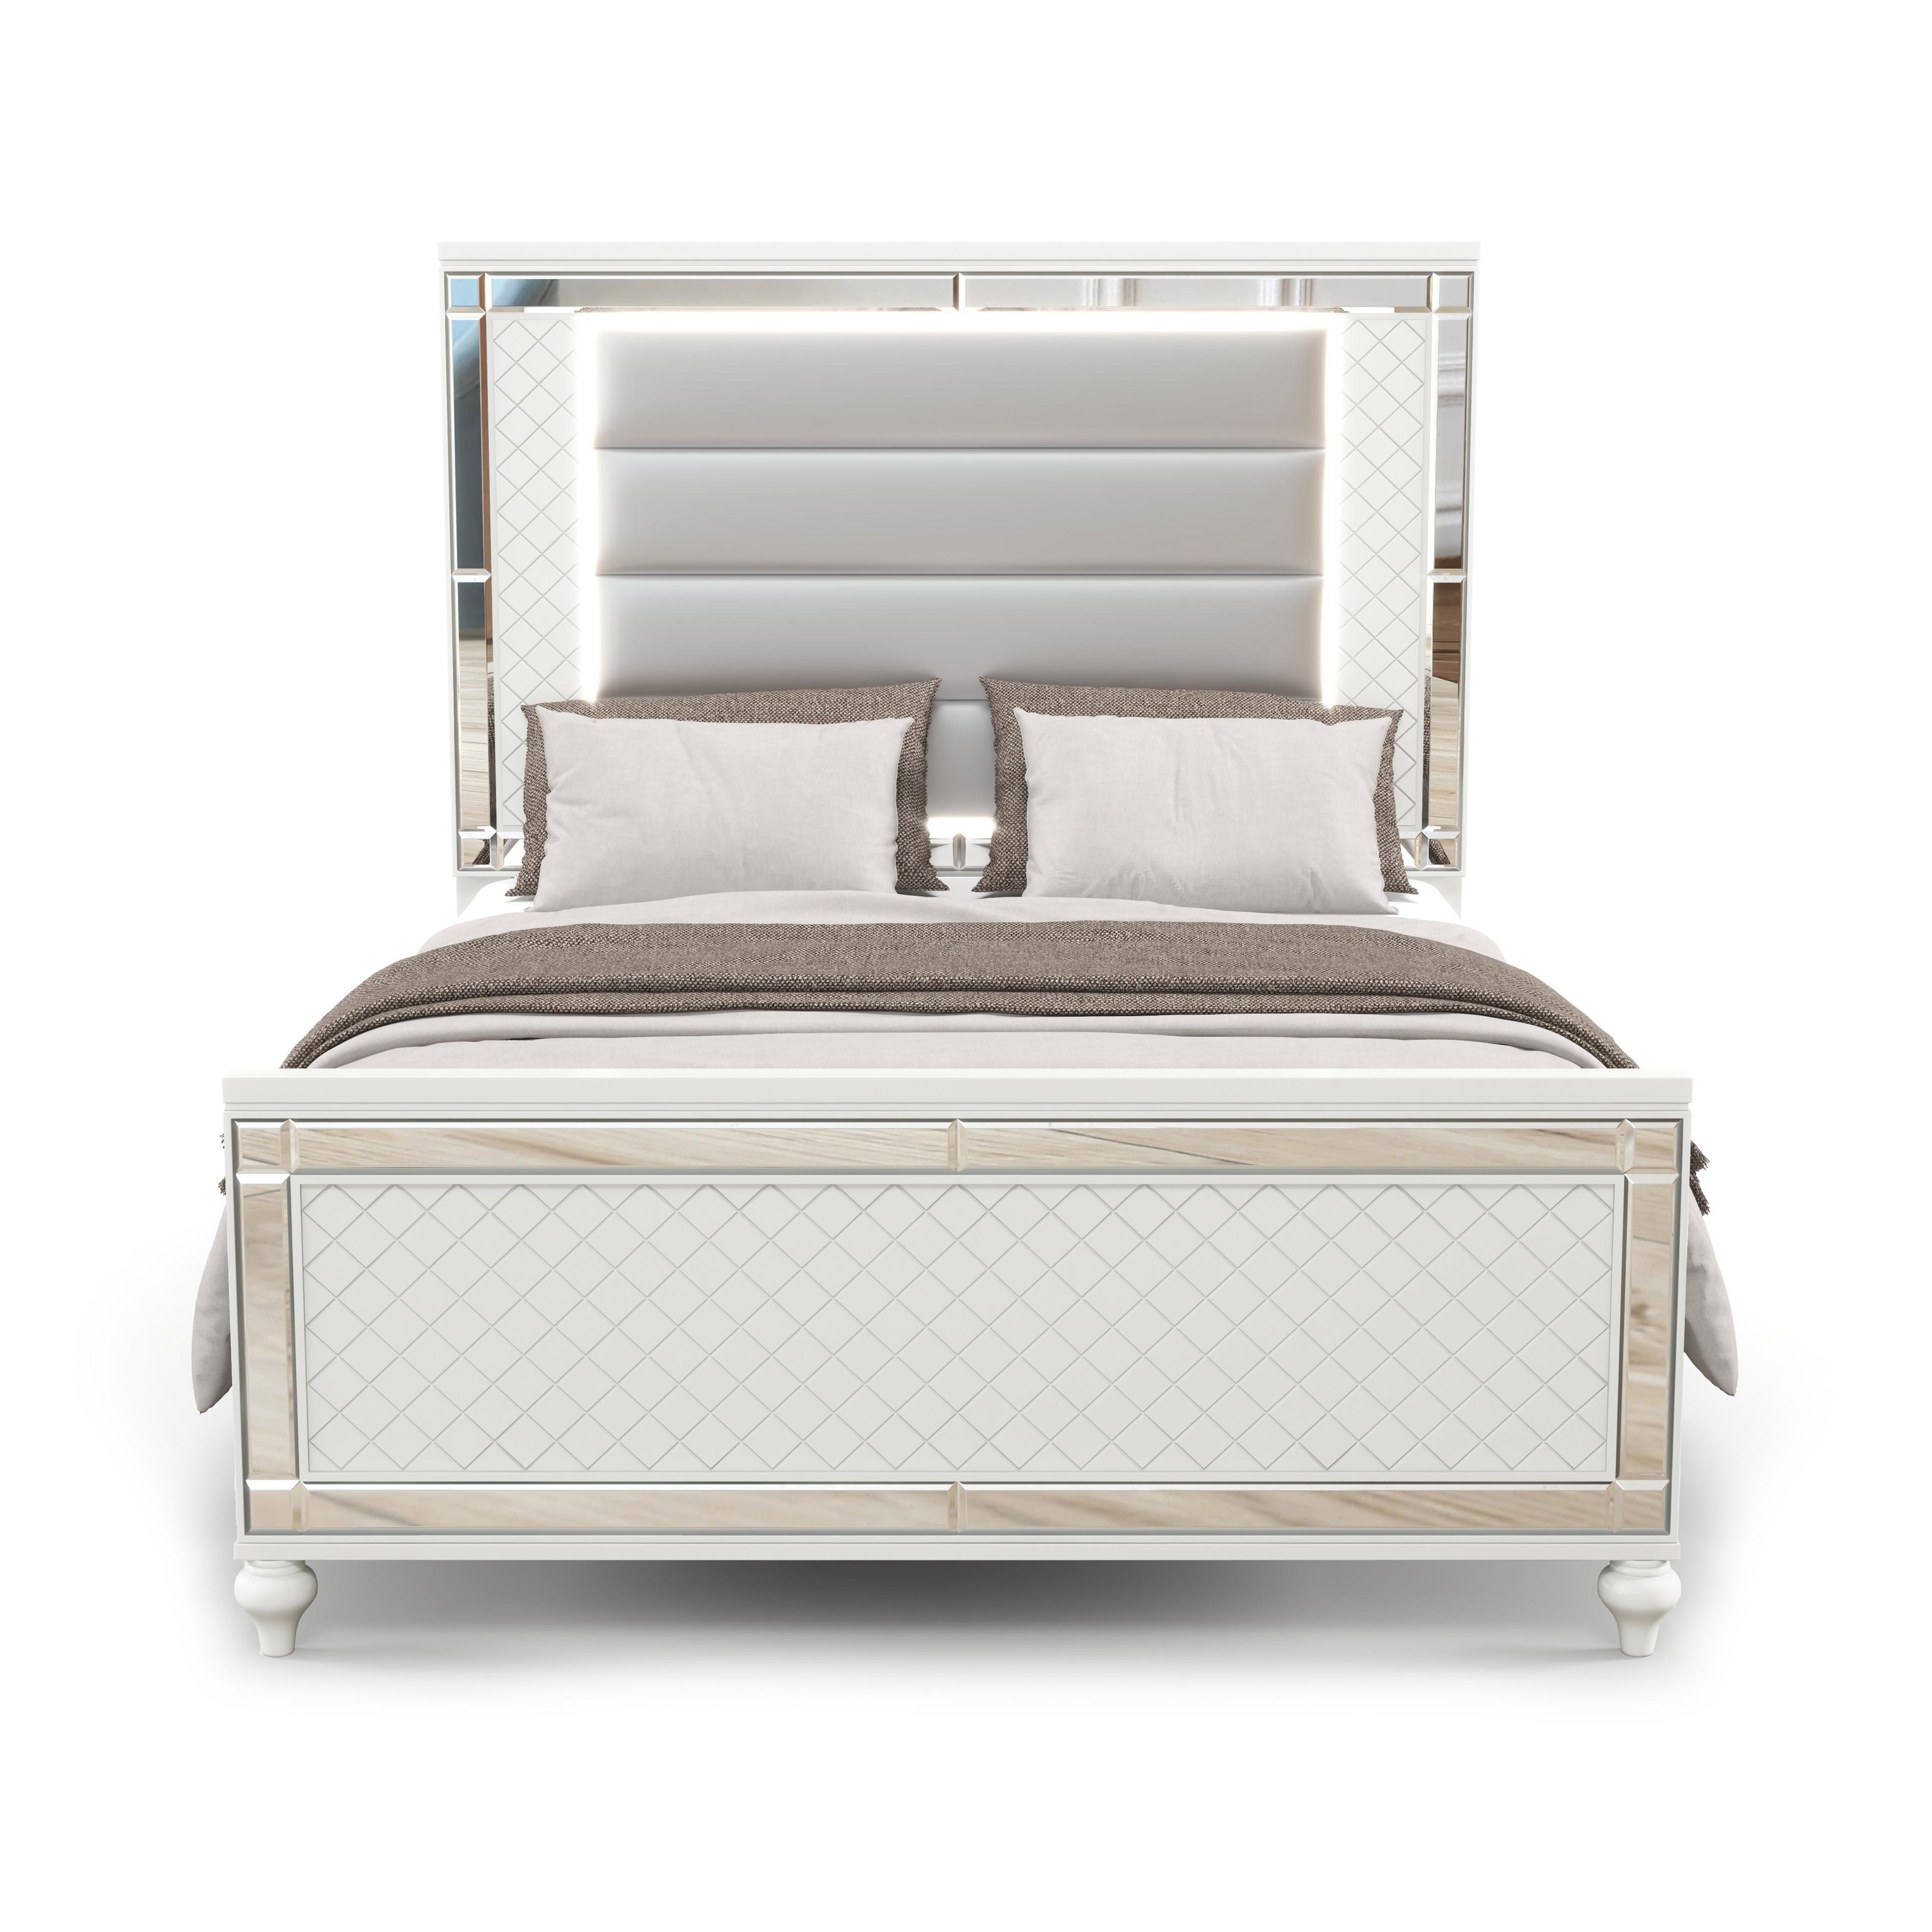 Malibu Queen Bed with LED Lighting